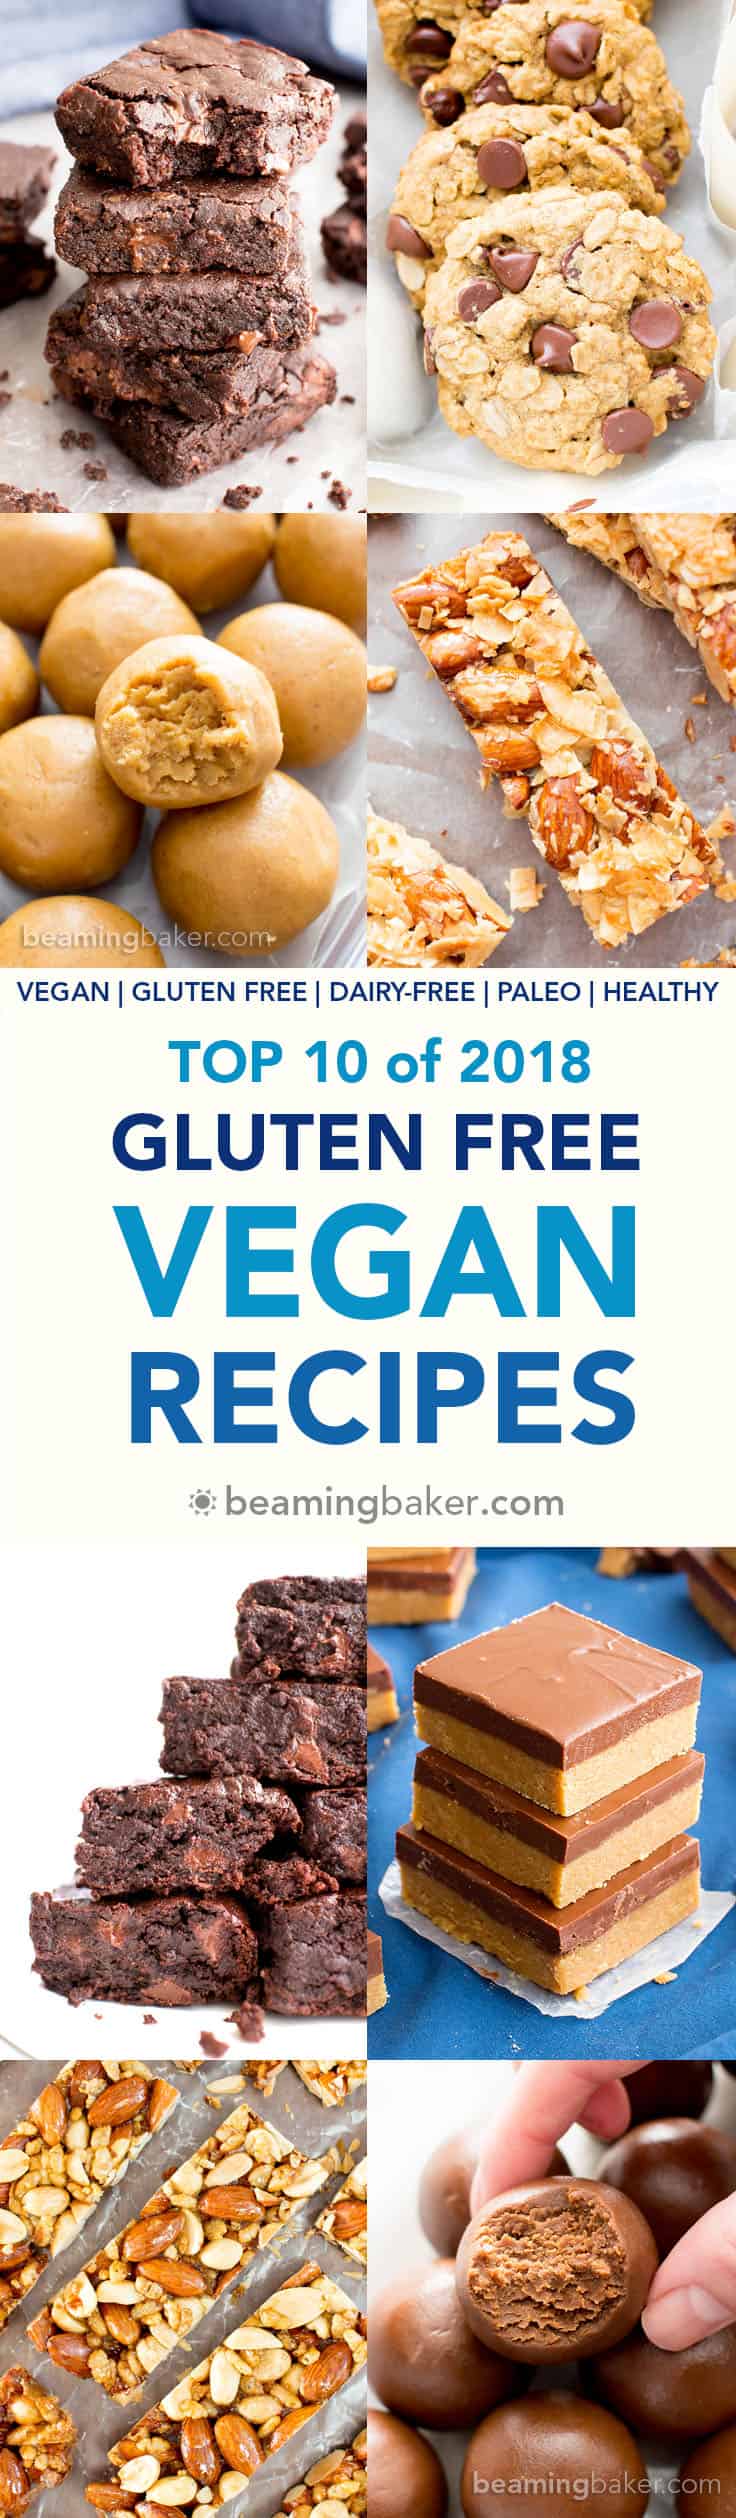 Top 10 Gluten Free Vegan Recipes of 2018 on Beaming Baker: a delicious year in review of the most POPULAR easy 'n healthy vegan recipes on the blog... from cookies & cakes to no bake snacks and bars, ice cream, candy, and quick breads! #GlutenFreeVegan #VeganRecipes #VeganDesserts #HealthySnacks #HealthyDesserts #BeamingBaker #GlutenFreeBaking | Recipes on BeamingBaker.com